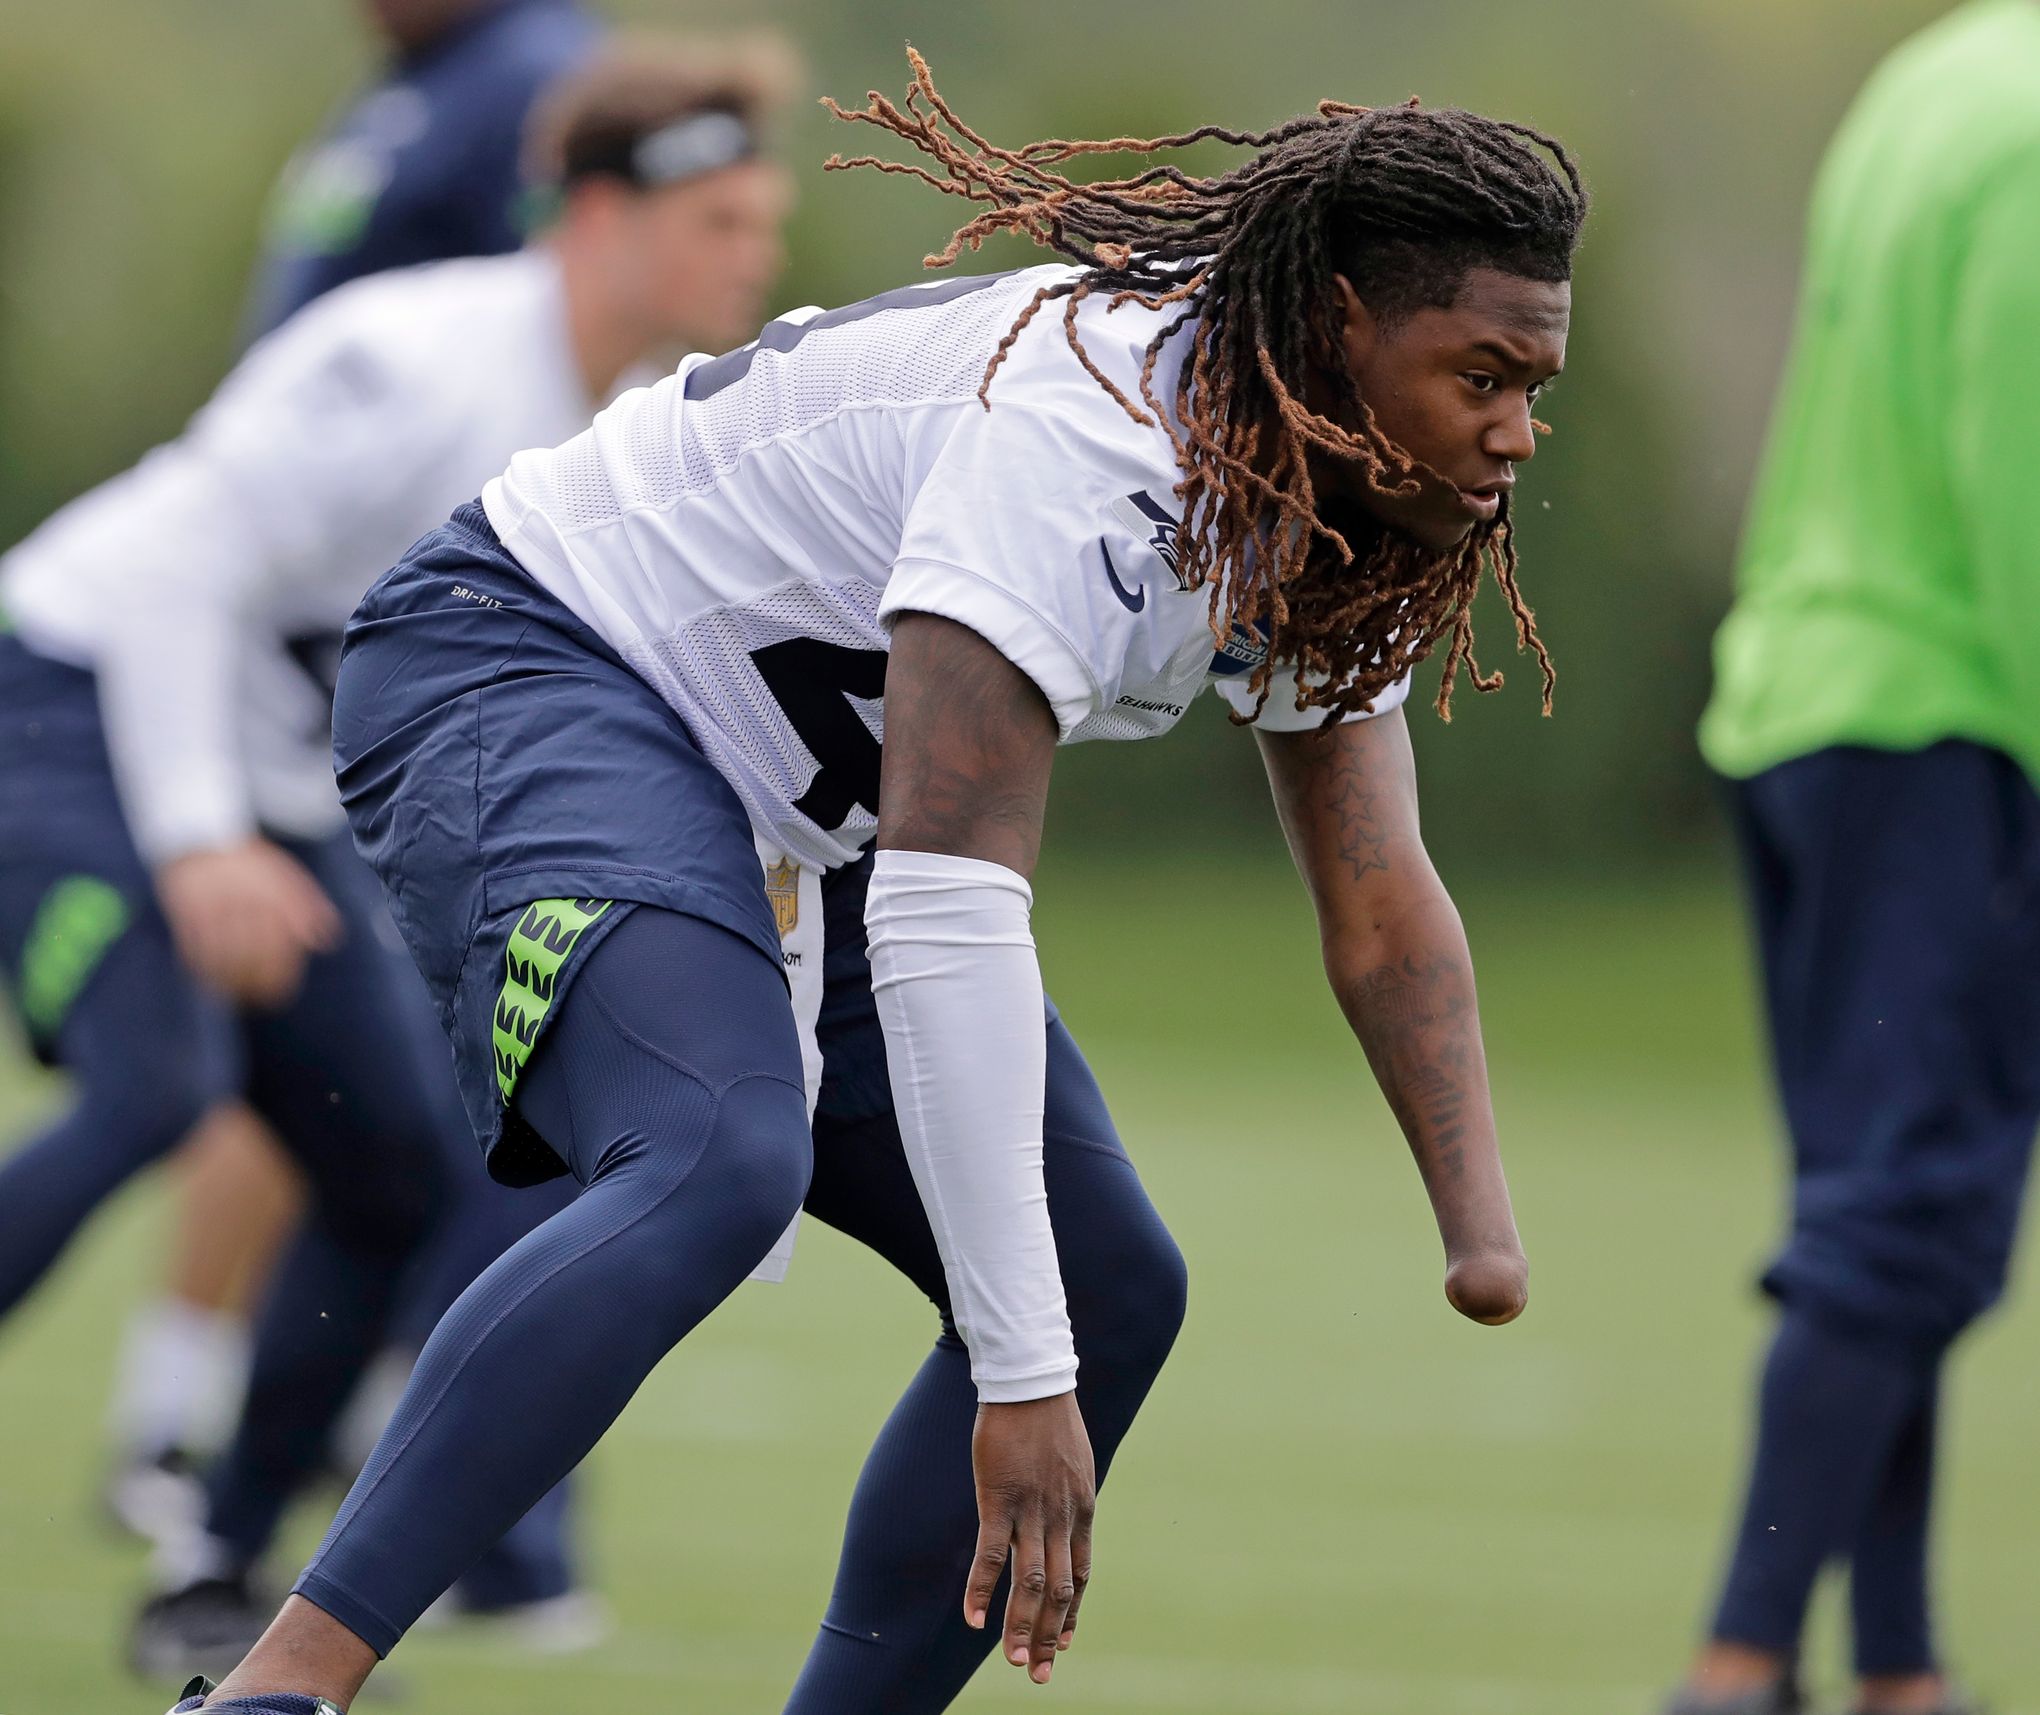 Seahawks sign draft picks Shaquem Griffin and Tre Flowers, make additions  of Keenan Reynolds and Dadi Nicolas official